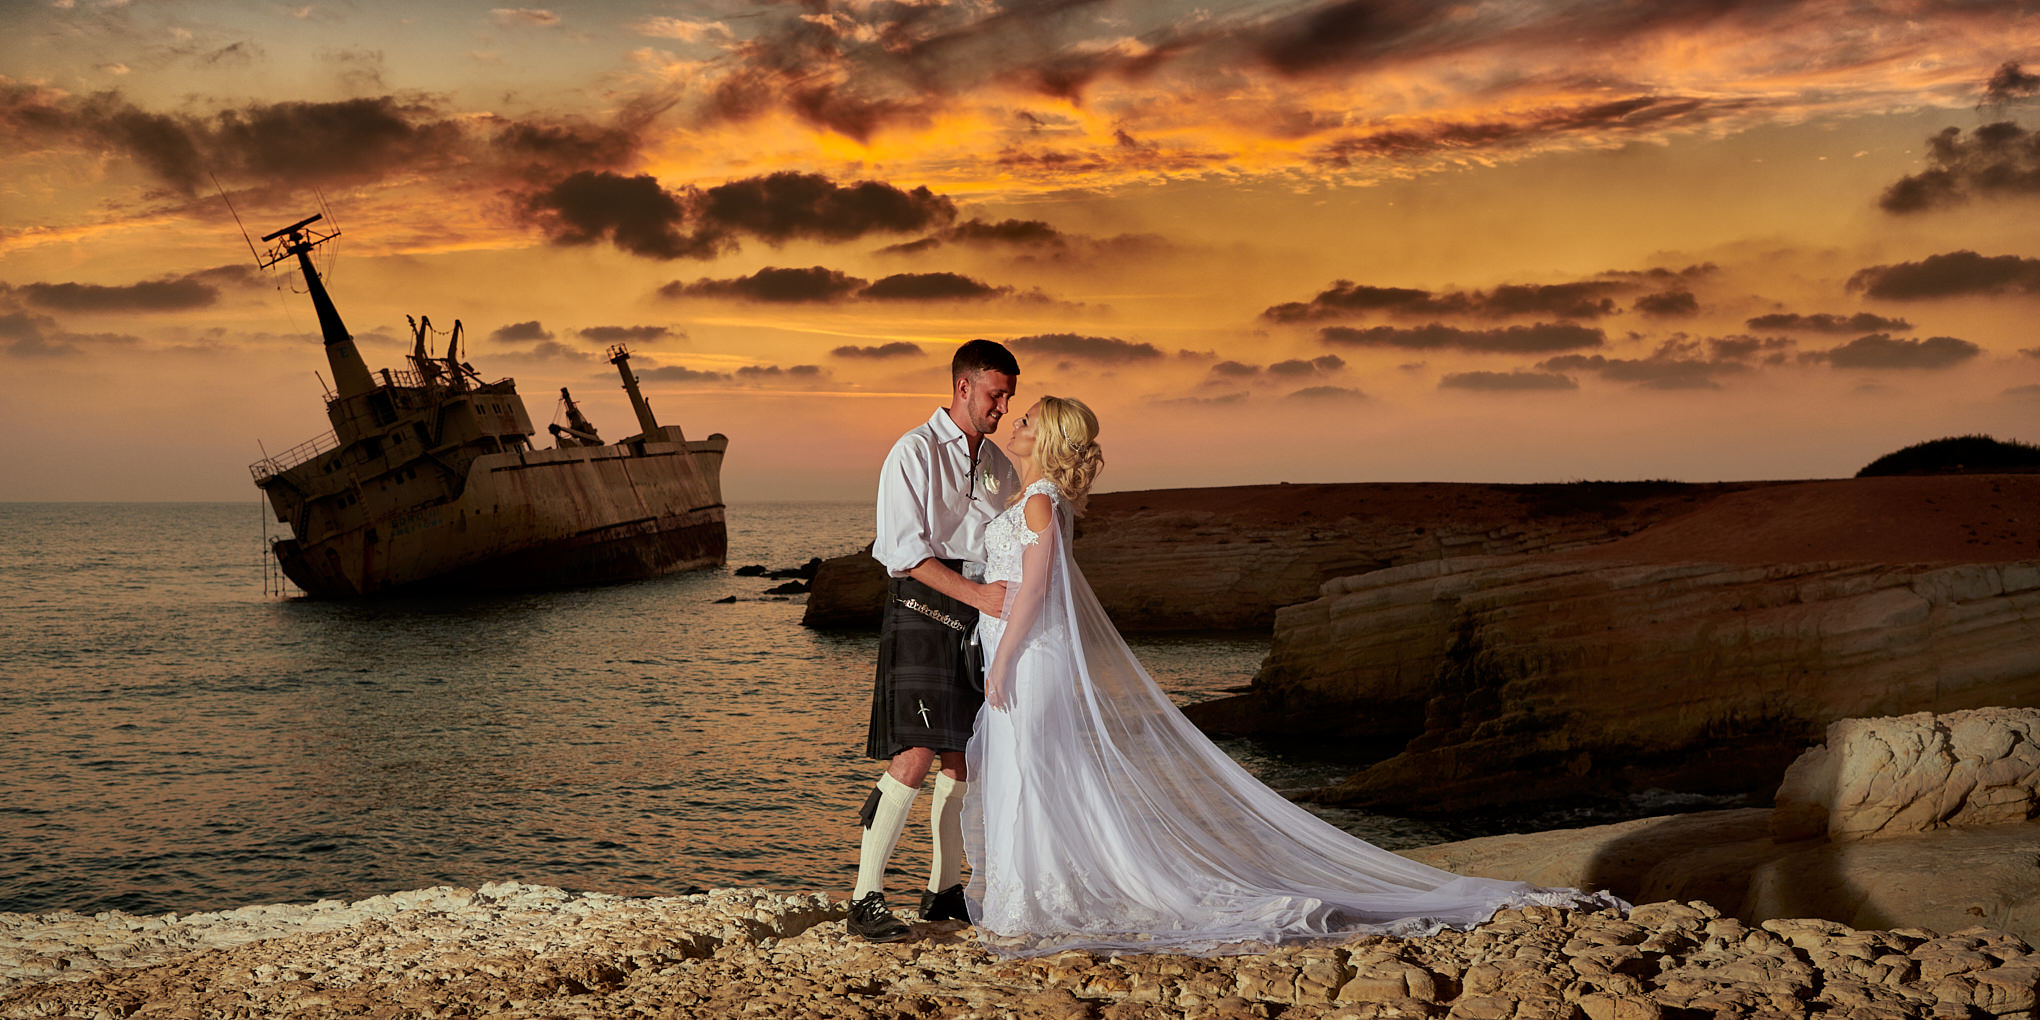 Capture One. Not all wedding photographers use Lightroom!